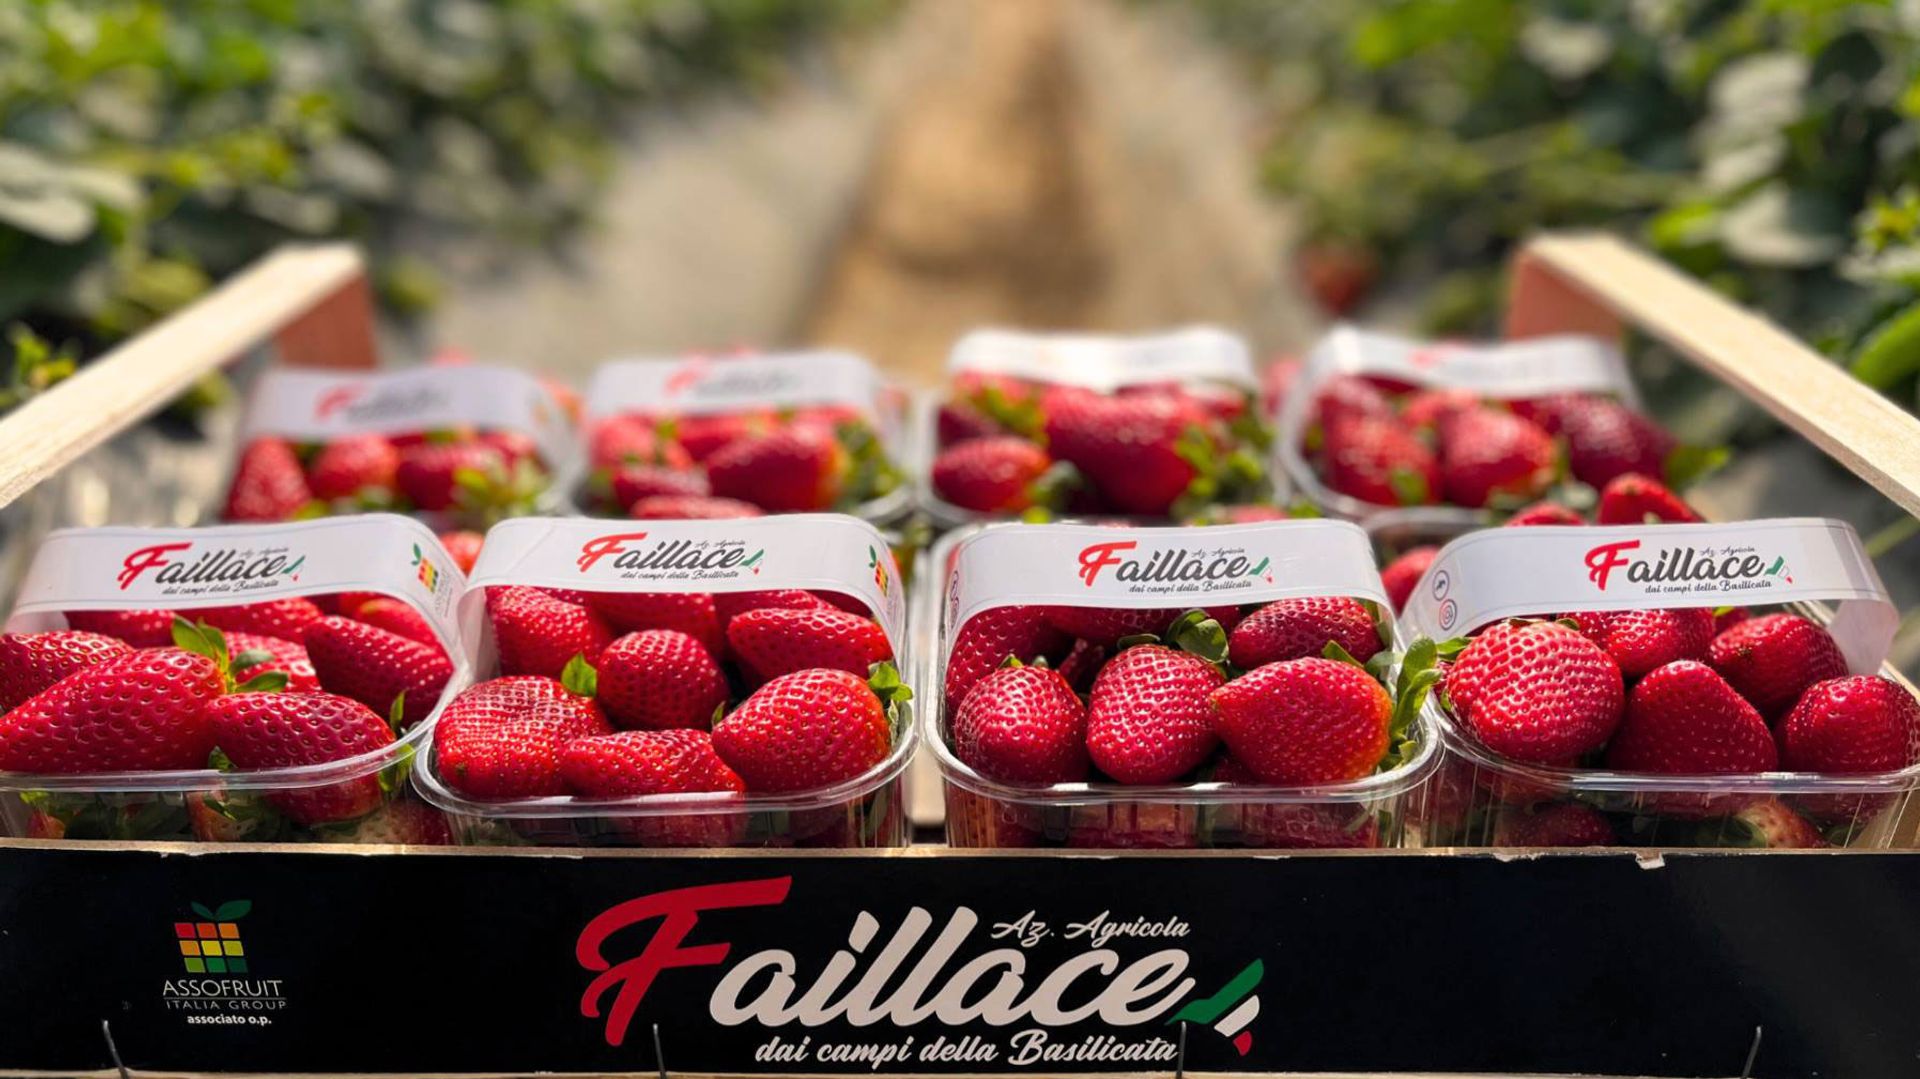 Strawberries from Roberto Faillace farm in Italy, the first farm to achieve certification to GLOBALG.A.P. IFA v6 Smart. 